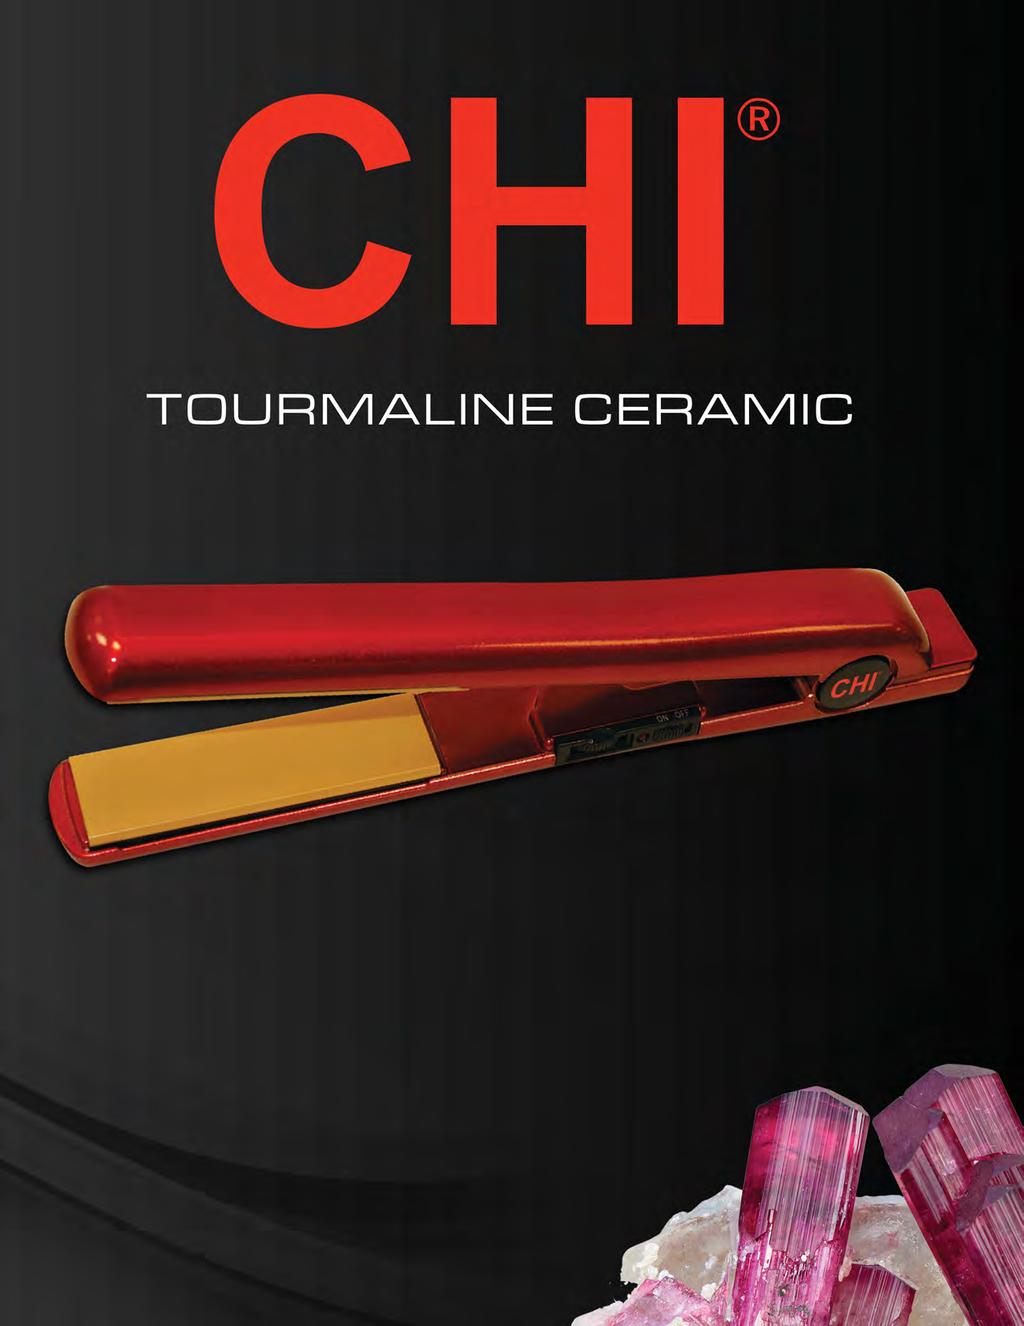 TOURMALINE CERAMIC Tourmaline is a crystal ground into a fine powder and infused into the Ceramic plates.